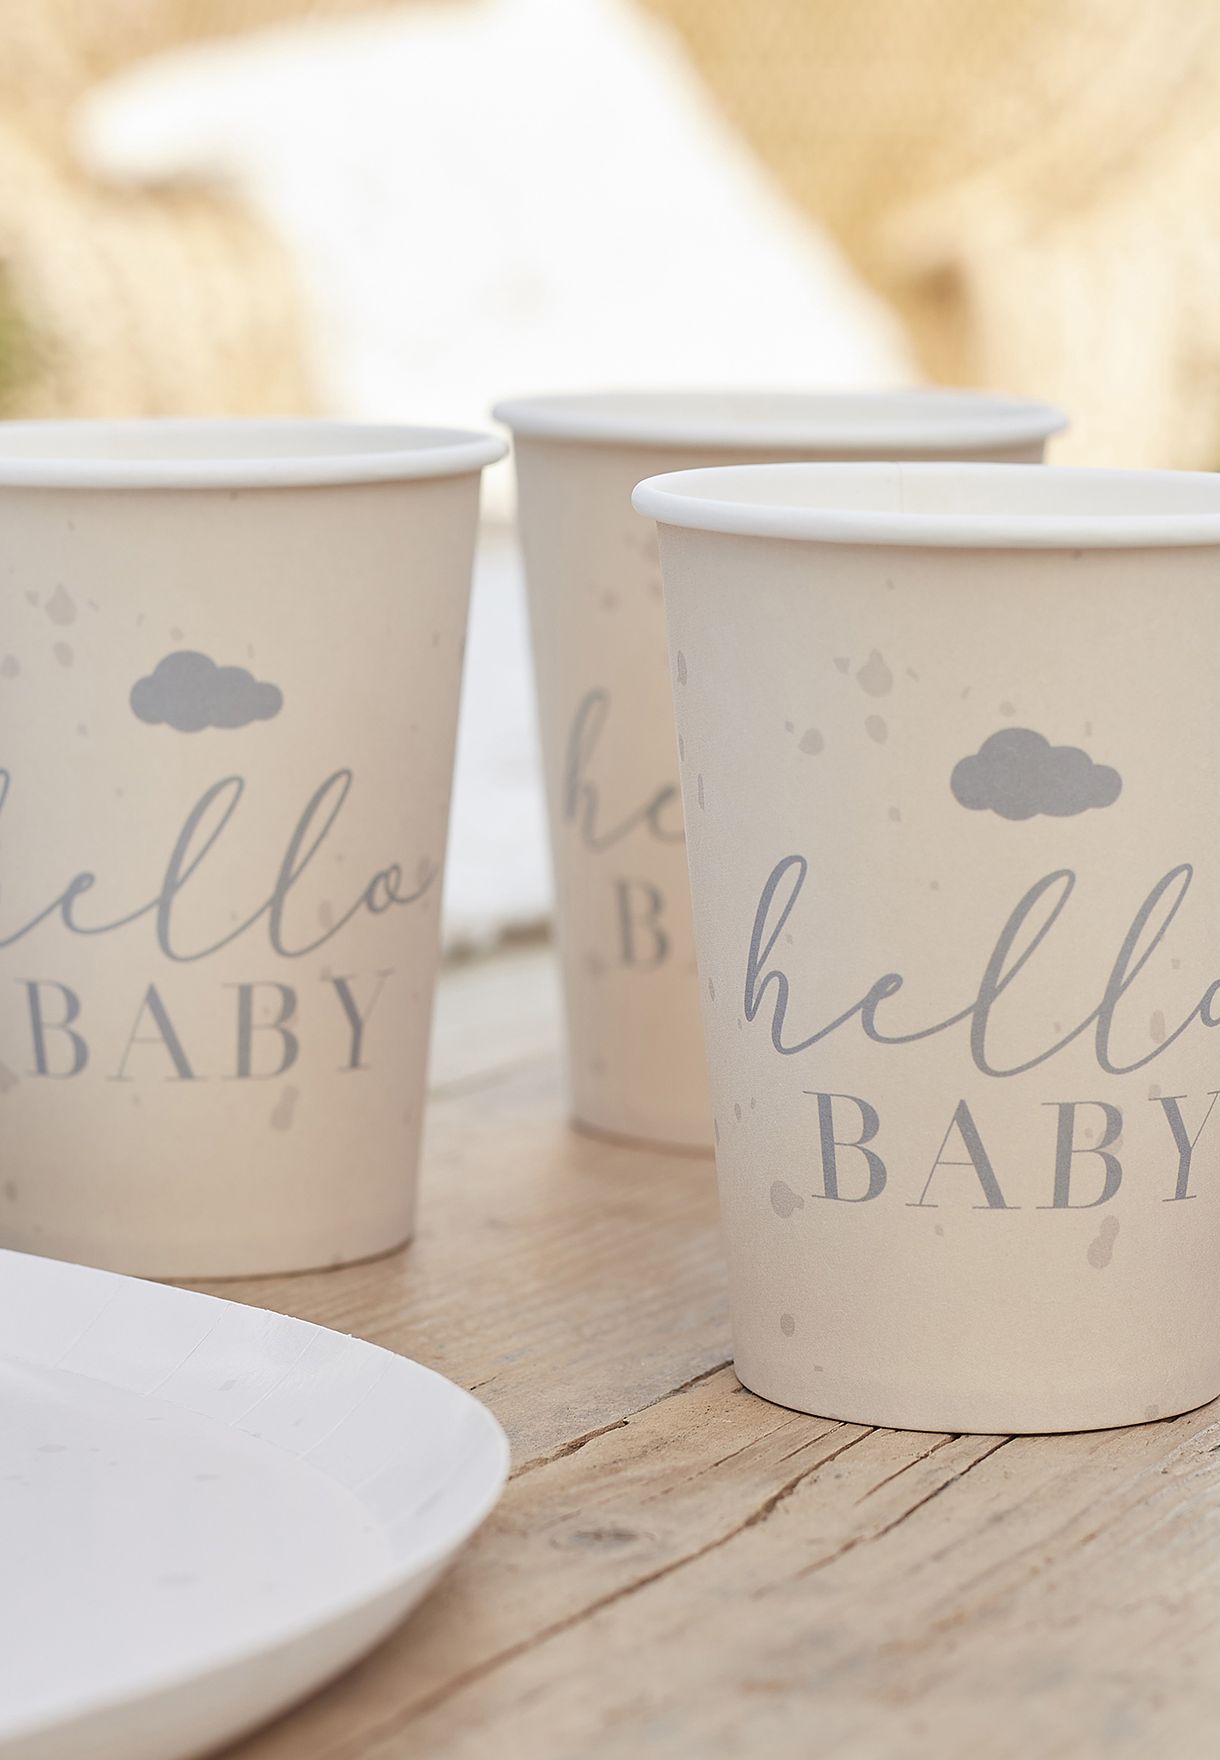 Hello Baby Speckle Eco Paper Cups